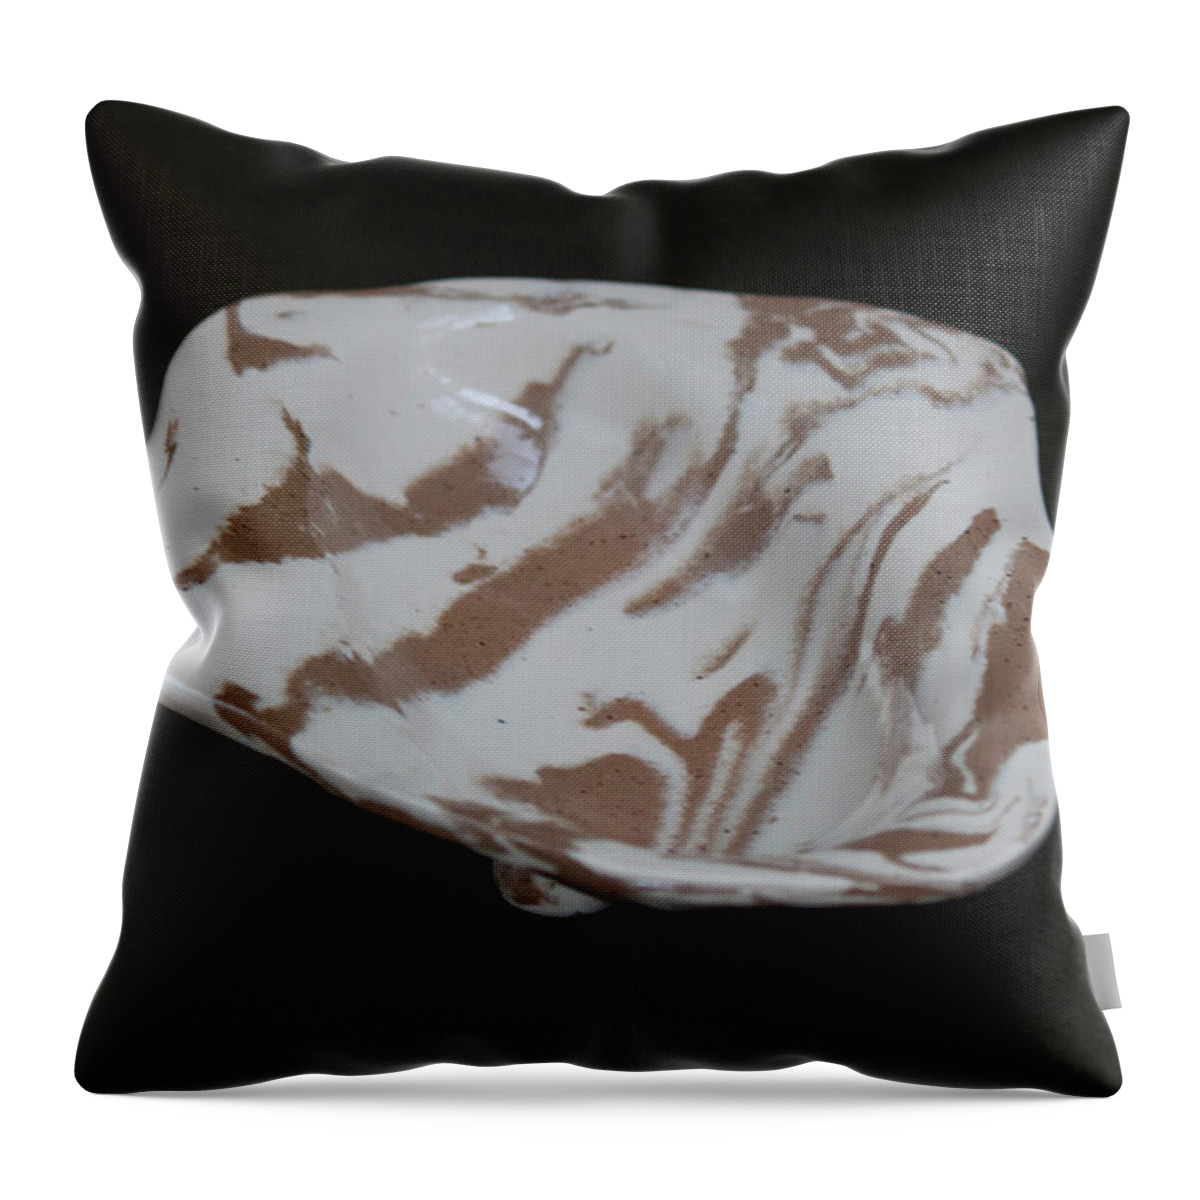 Clay Throw Pillow featuring the ceramic art Organic Oval Marbled Ceramic Dish by Suzanne Gaff